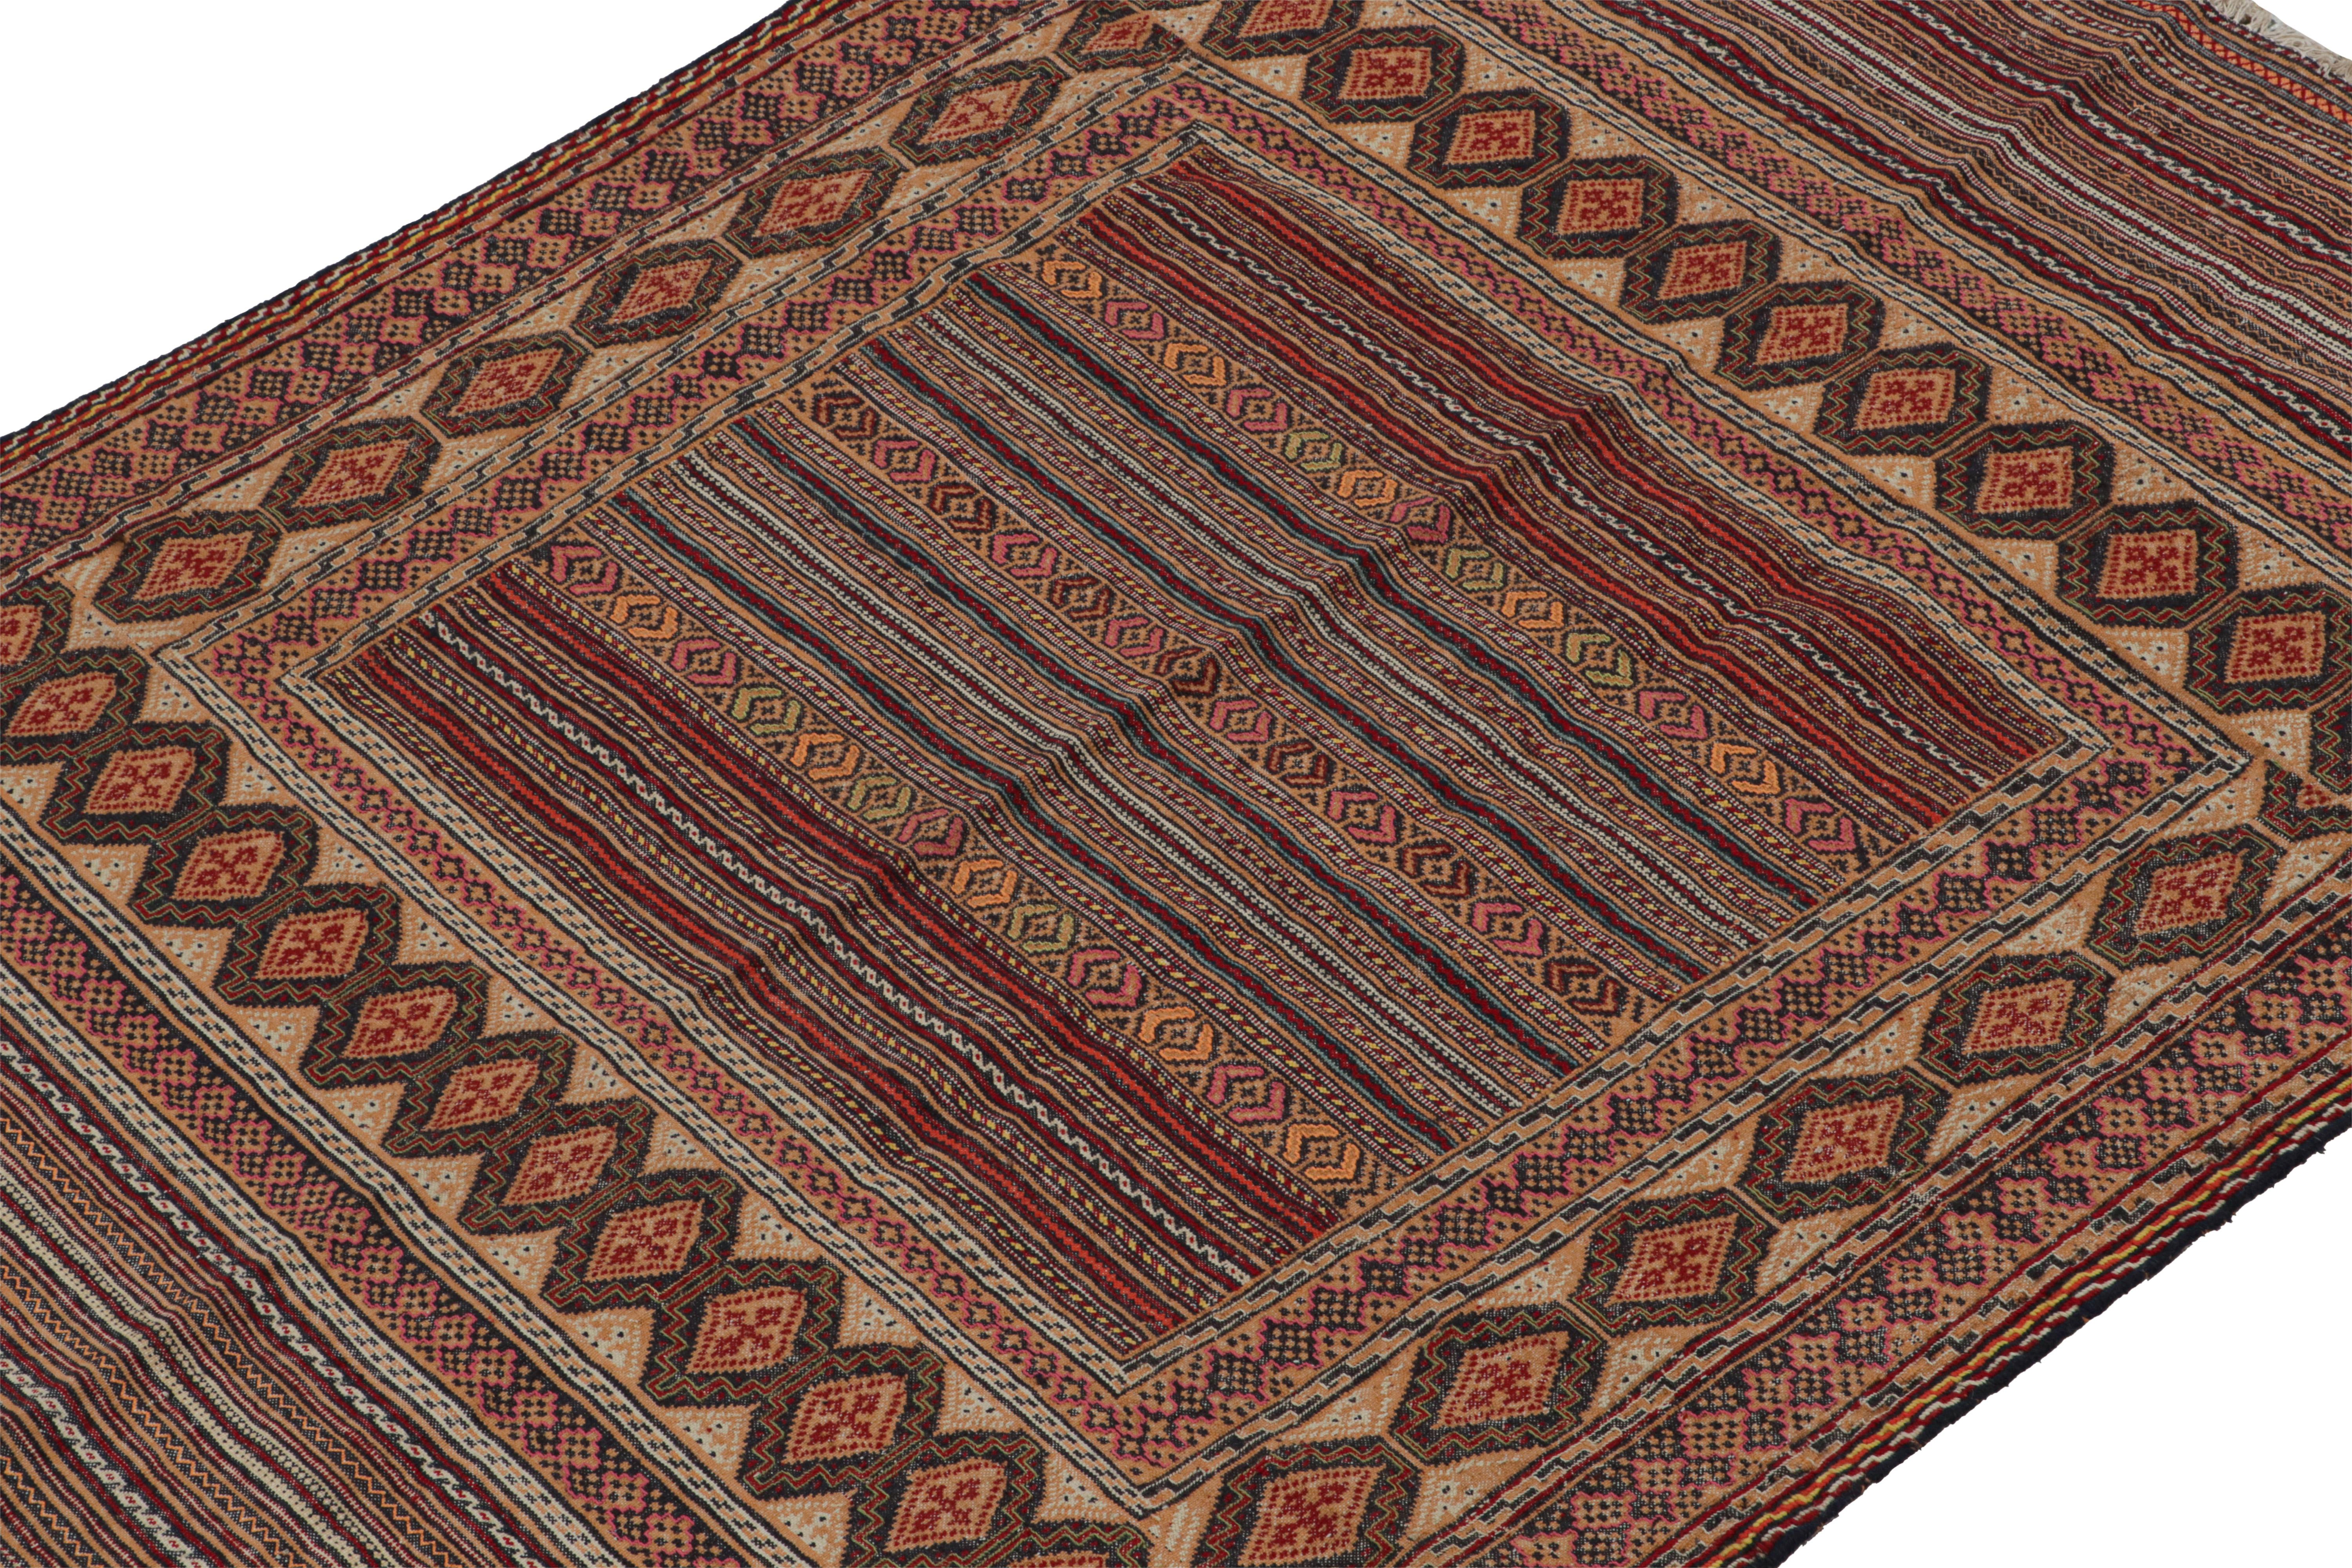 Afghan Vintage Baluch Kilim in Beige-Brown with Geometric Patterns, from Rug & Kilim For Sale